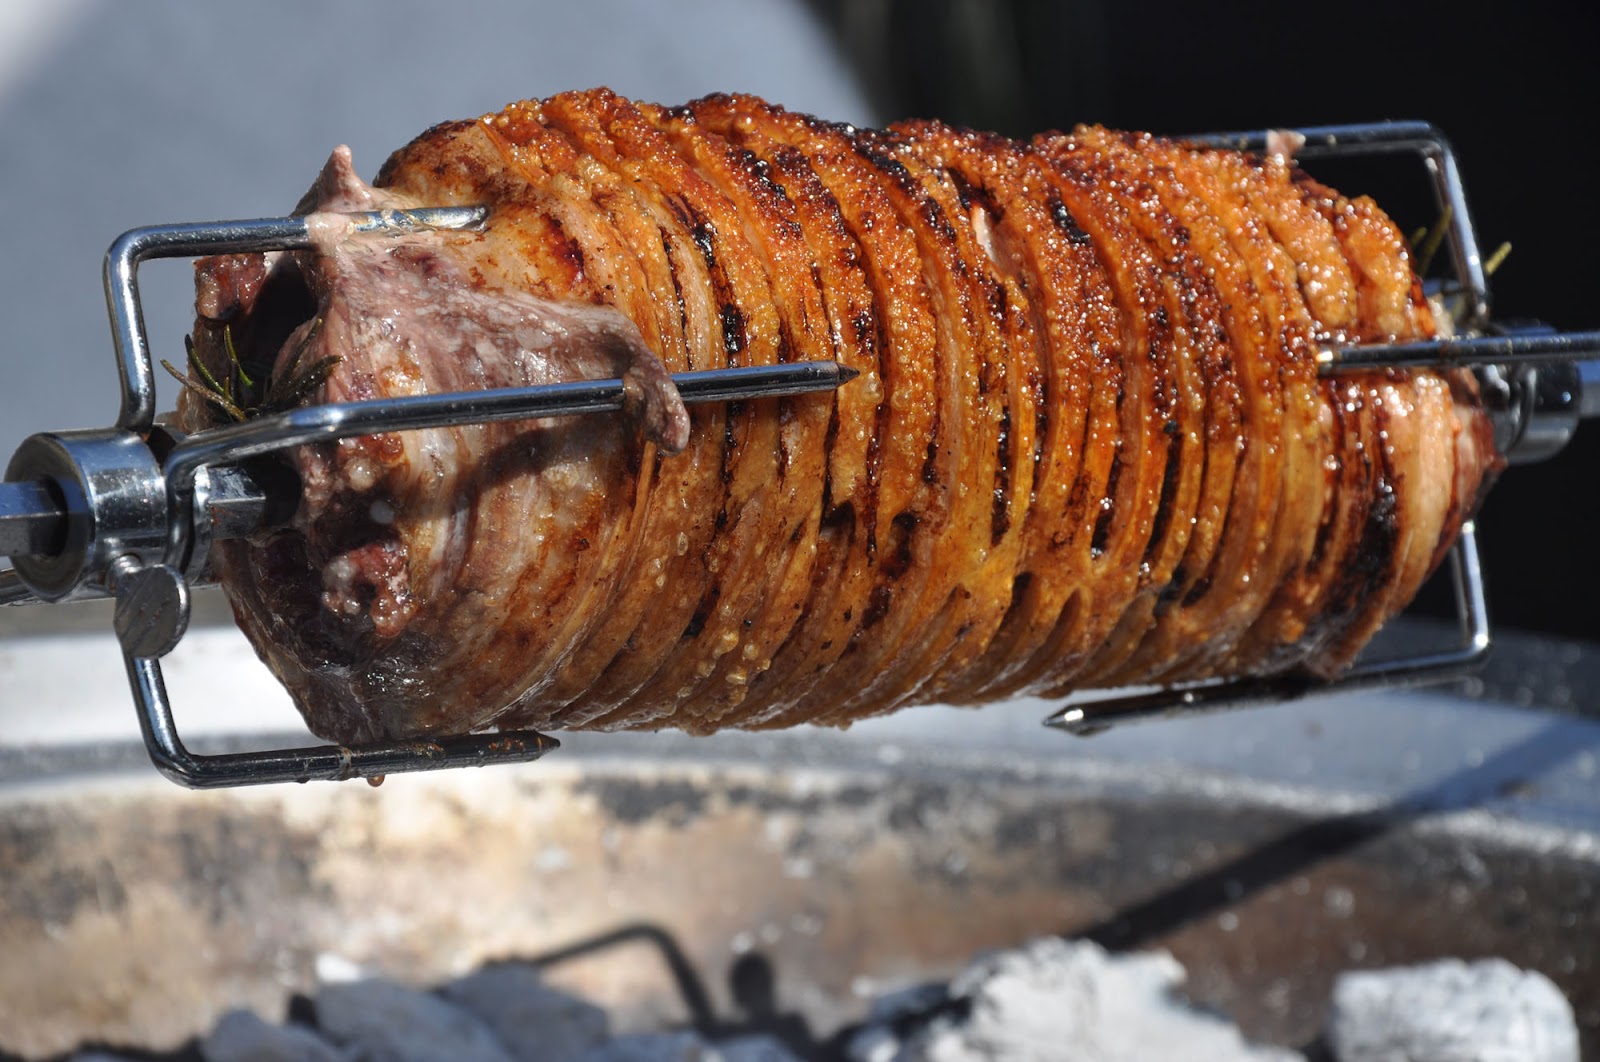 What is a good sauce to serve with pork cooked on a spit?